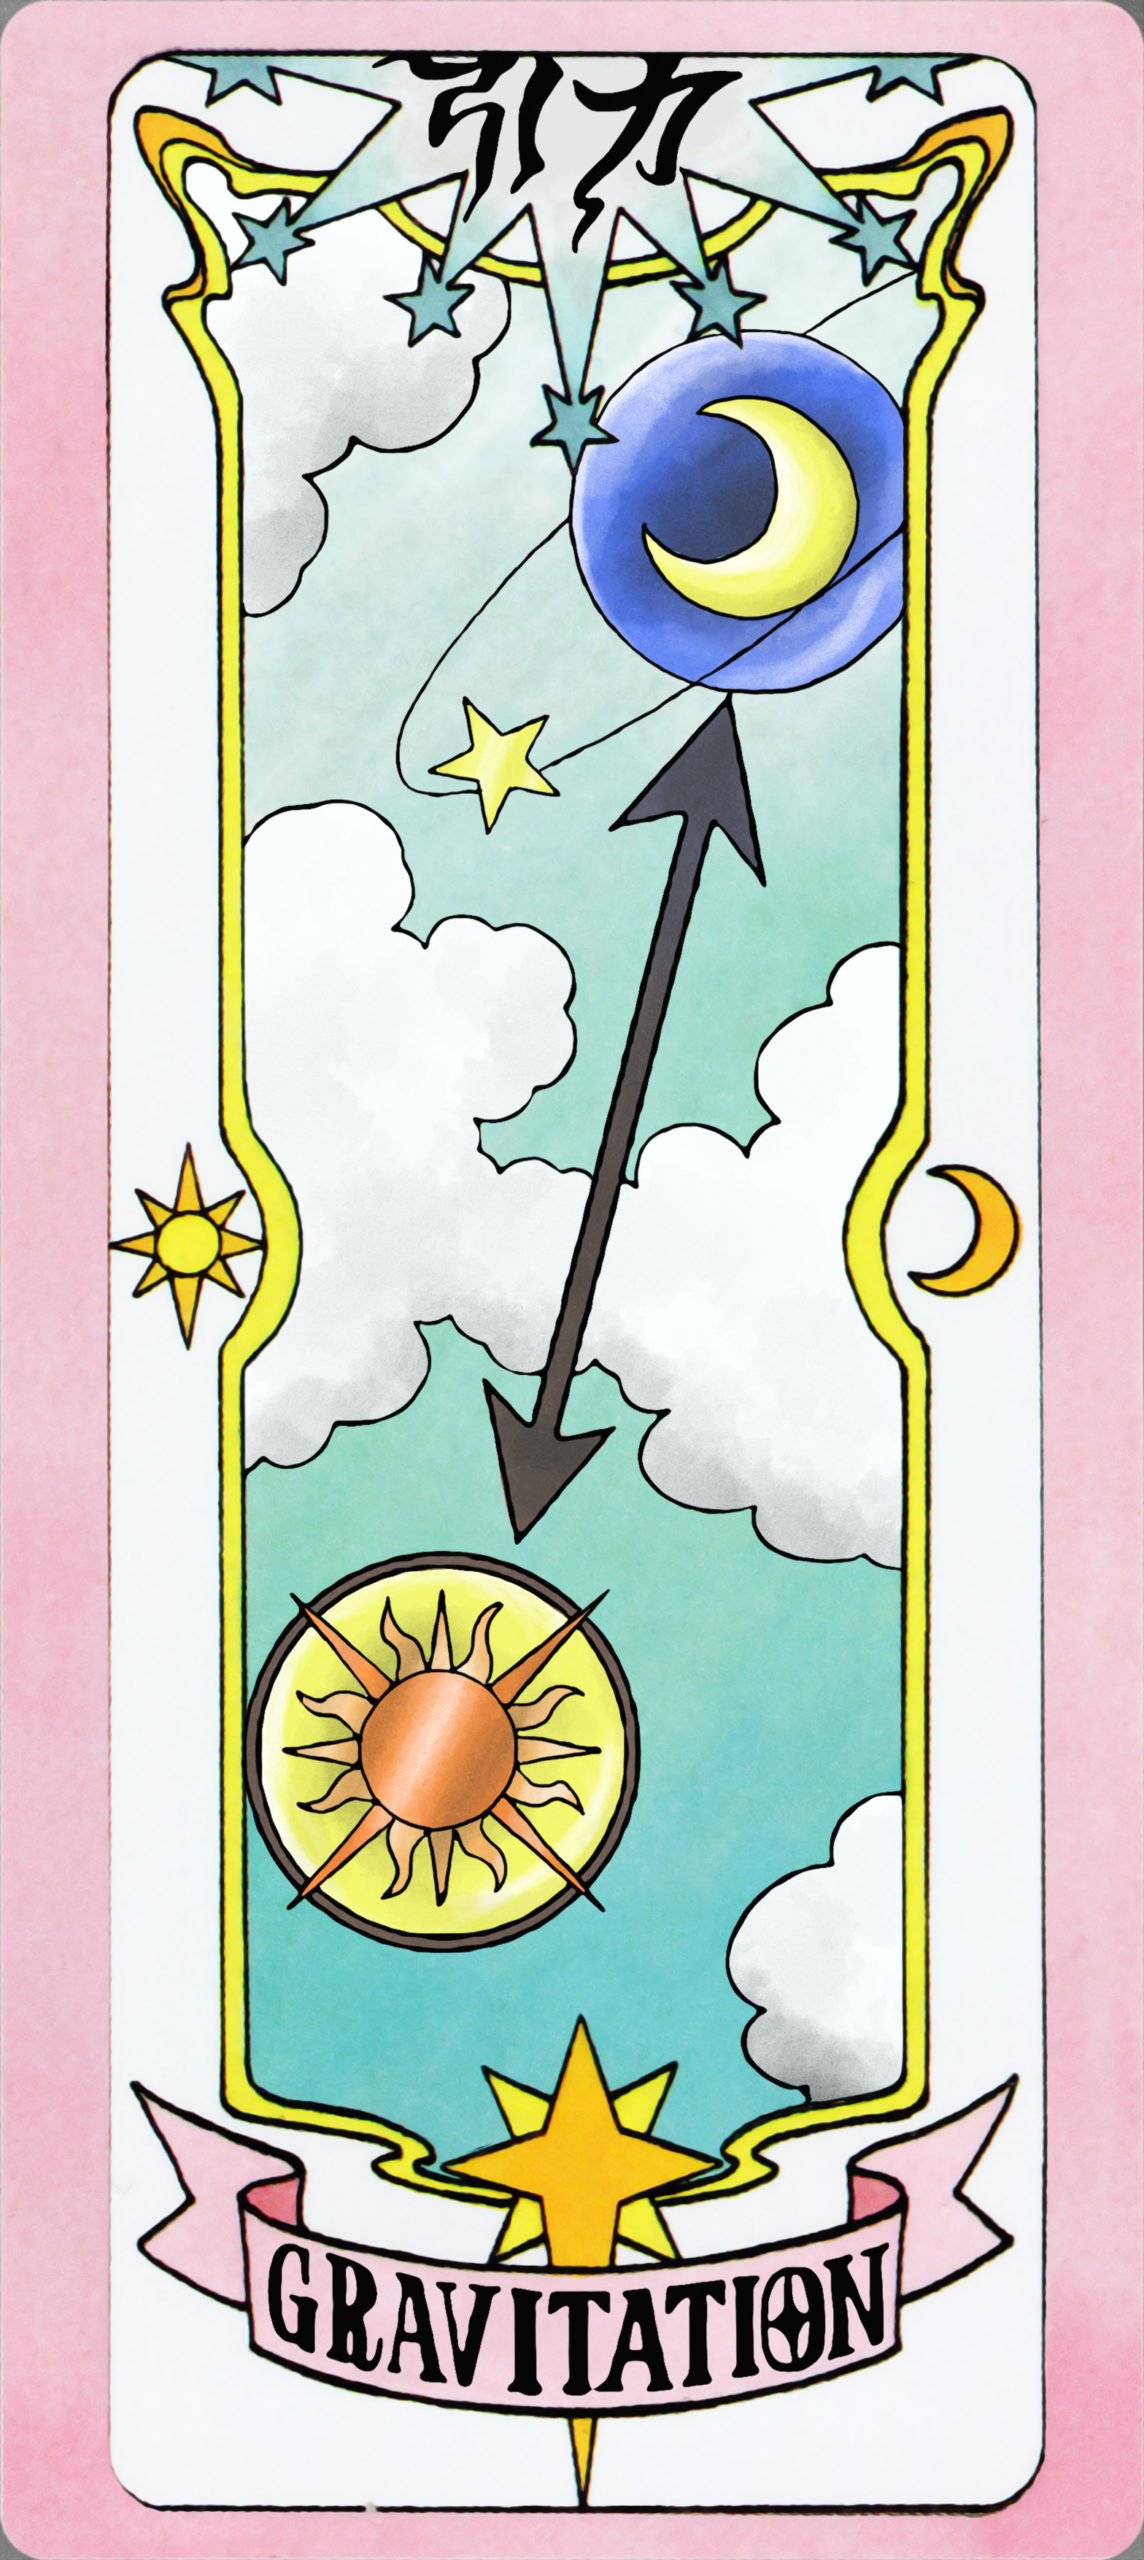 The Gravitation Clear Card. (Image: CLAMP)